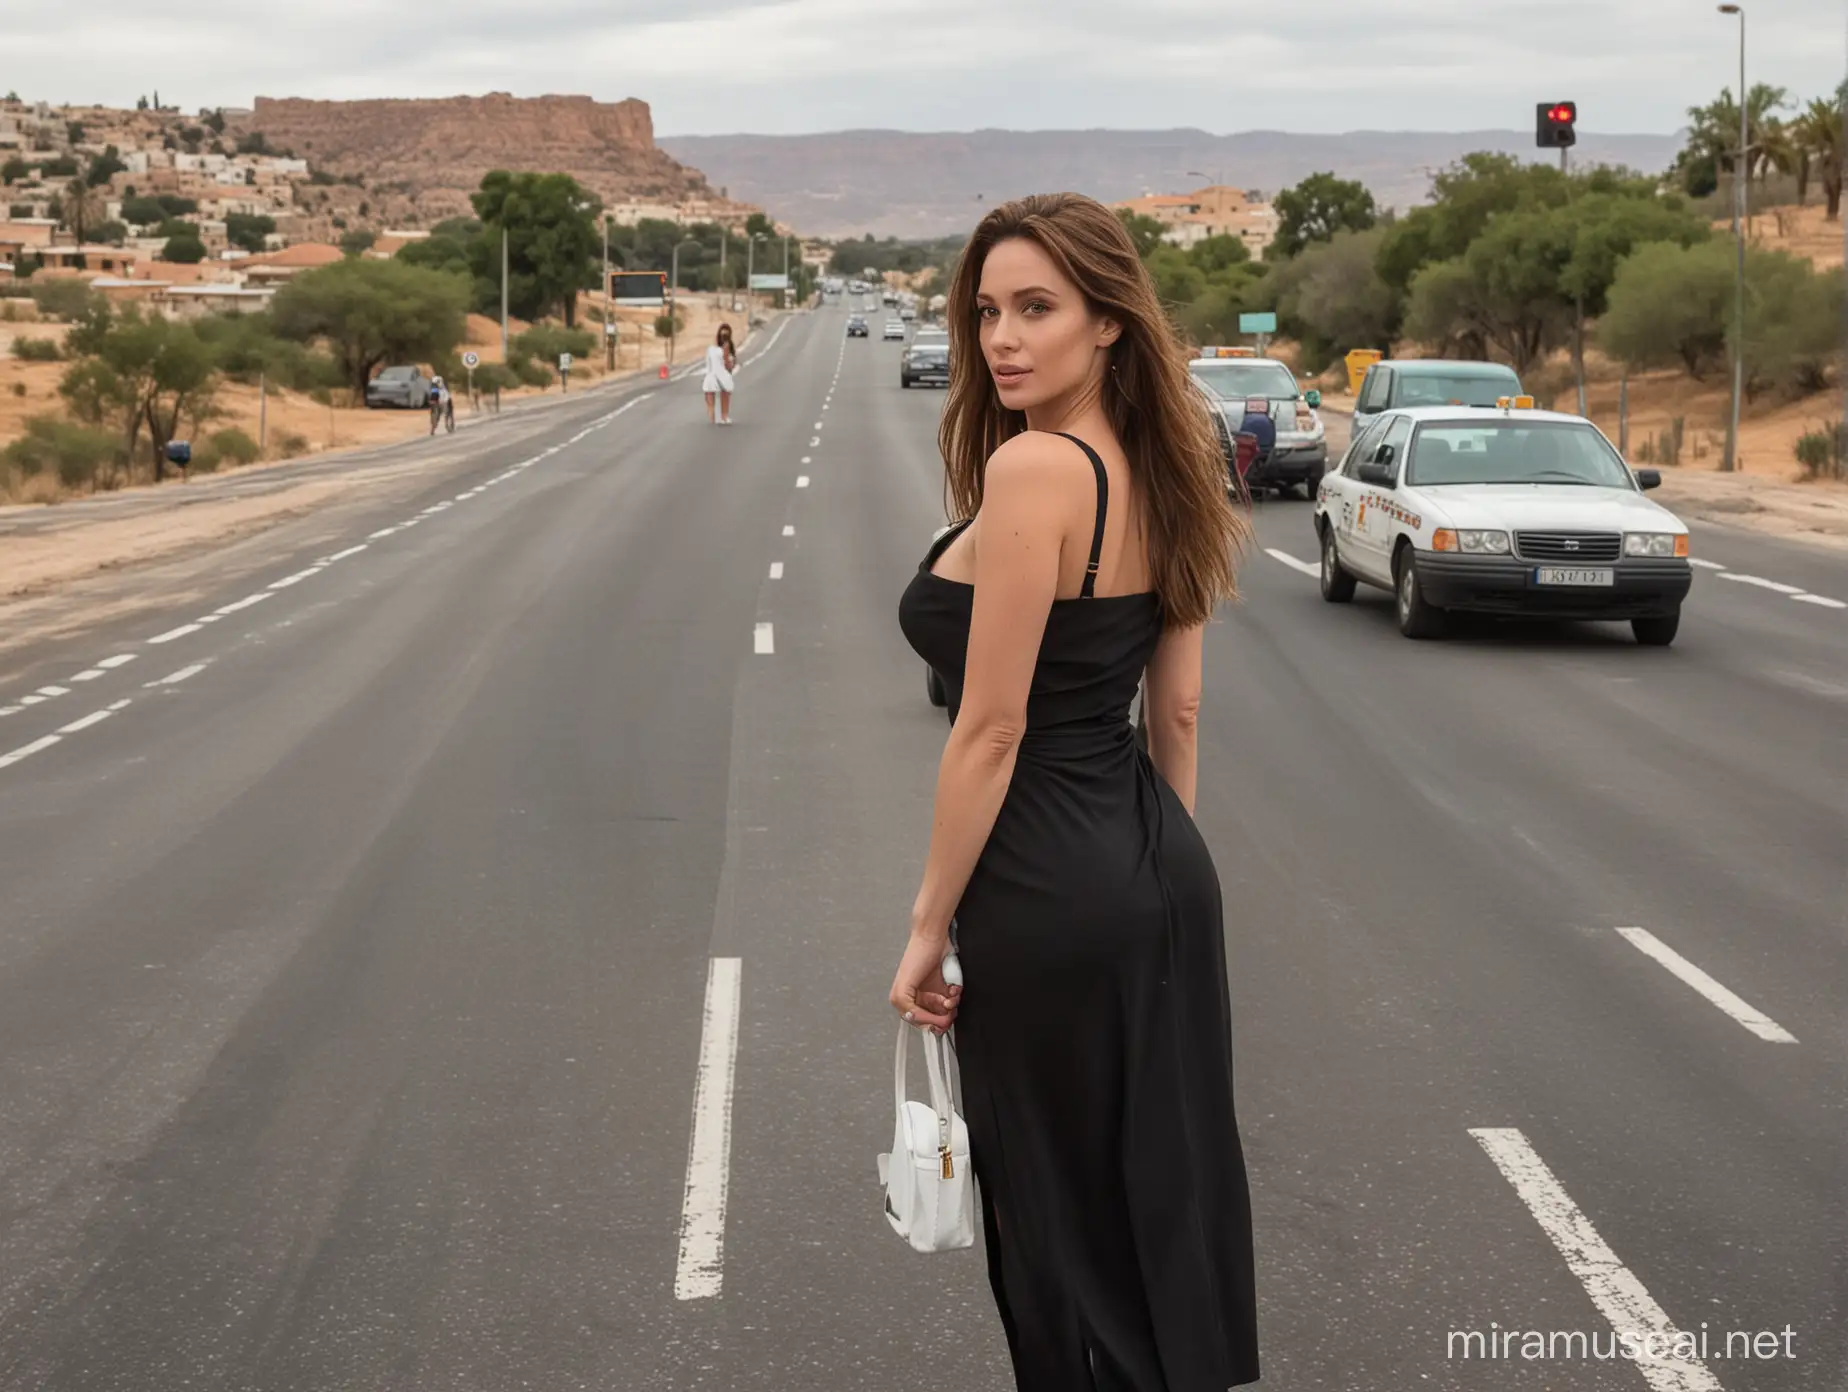 Angelina Joulie Waiting for Taxi on Urban Road